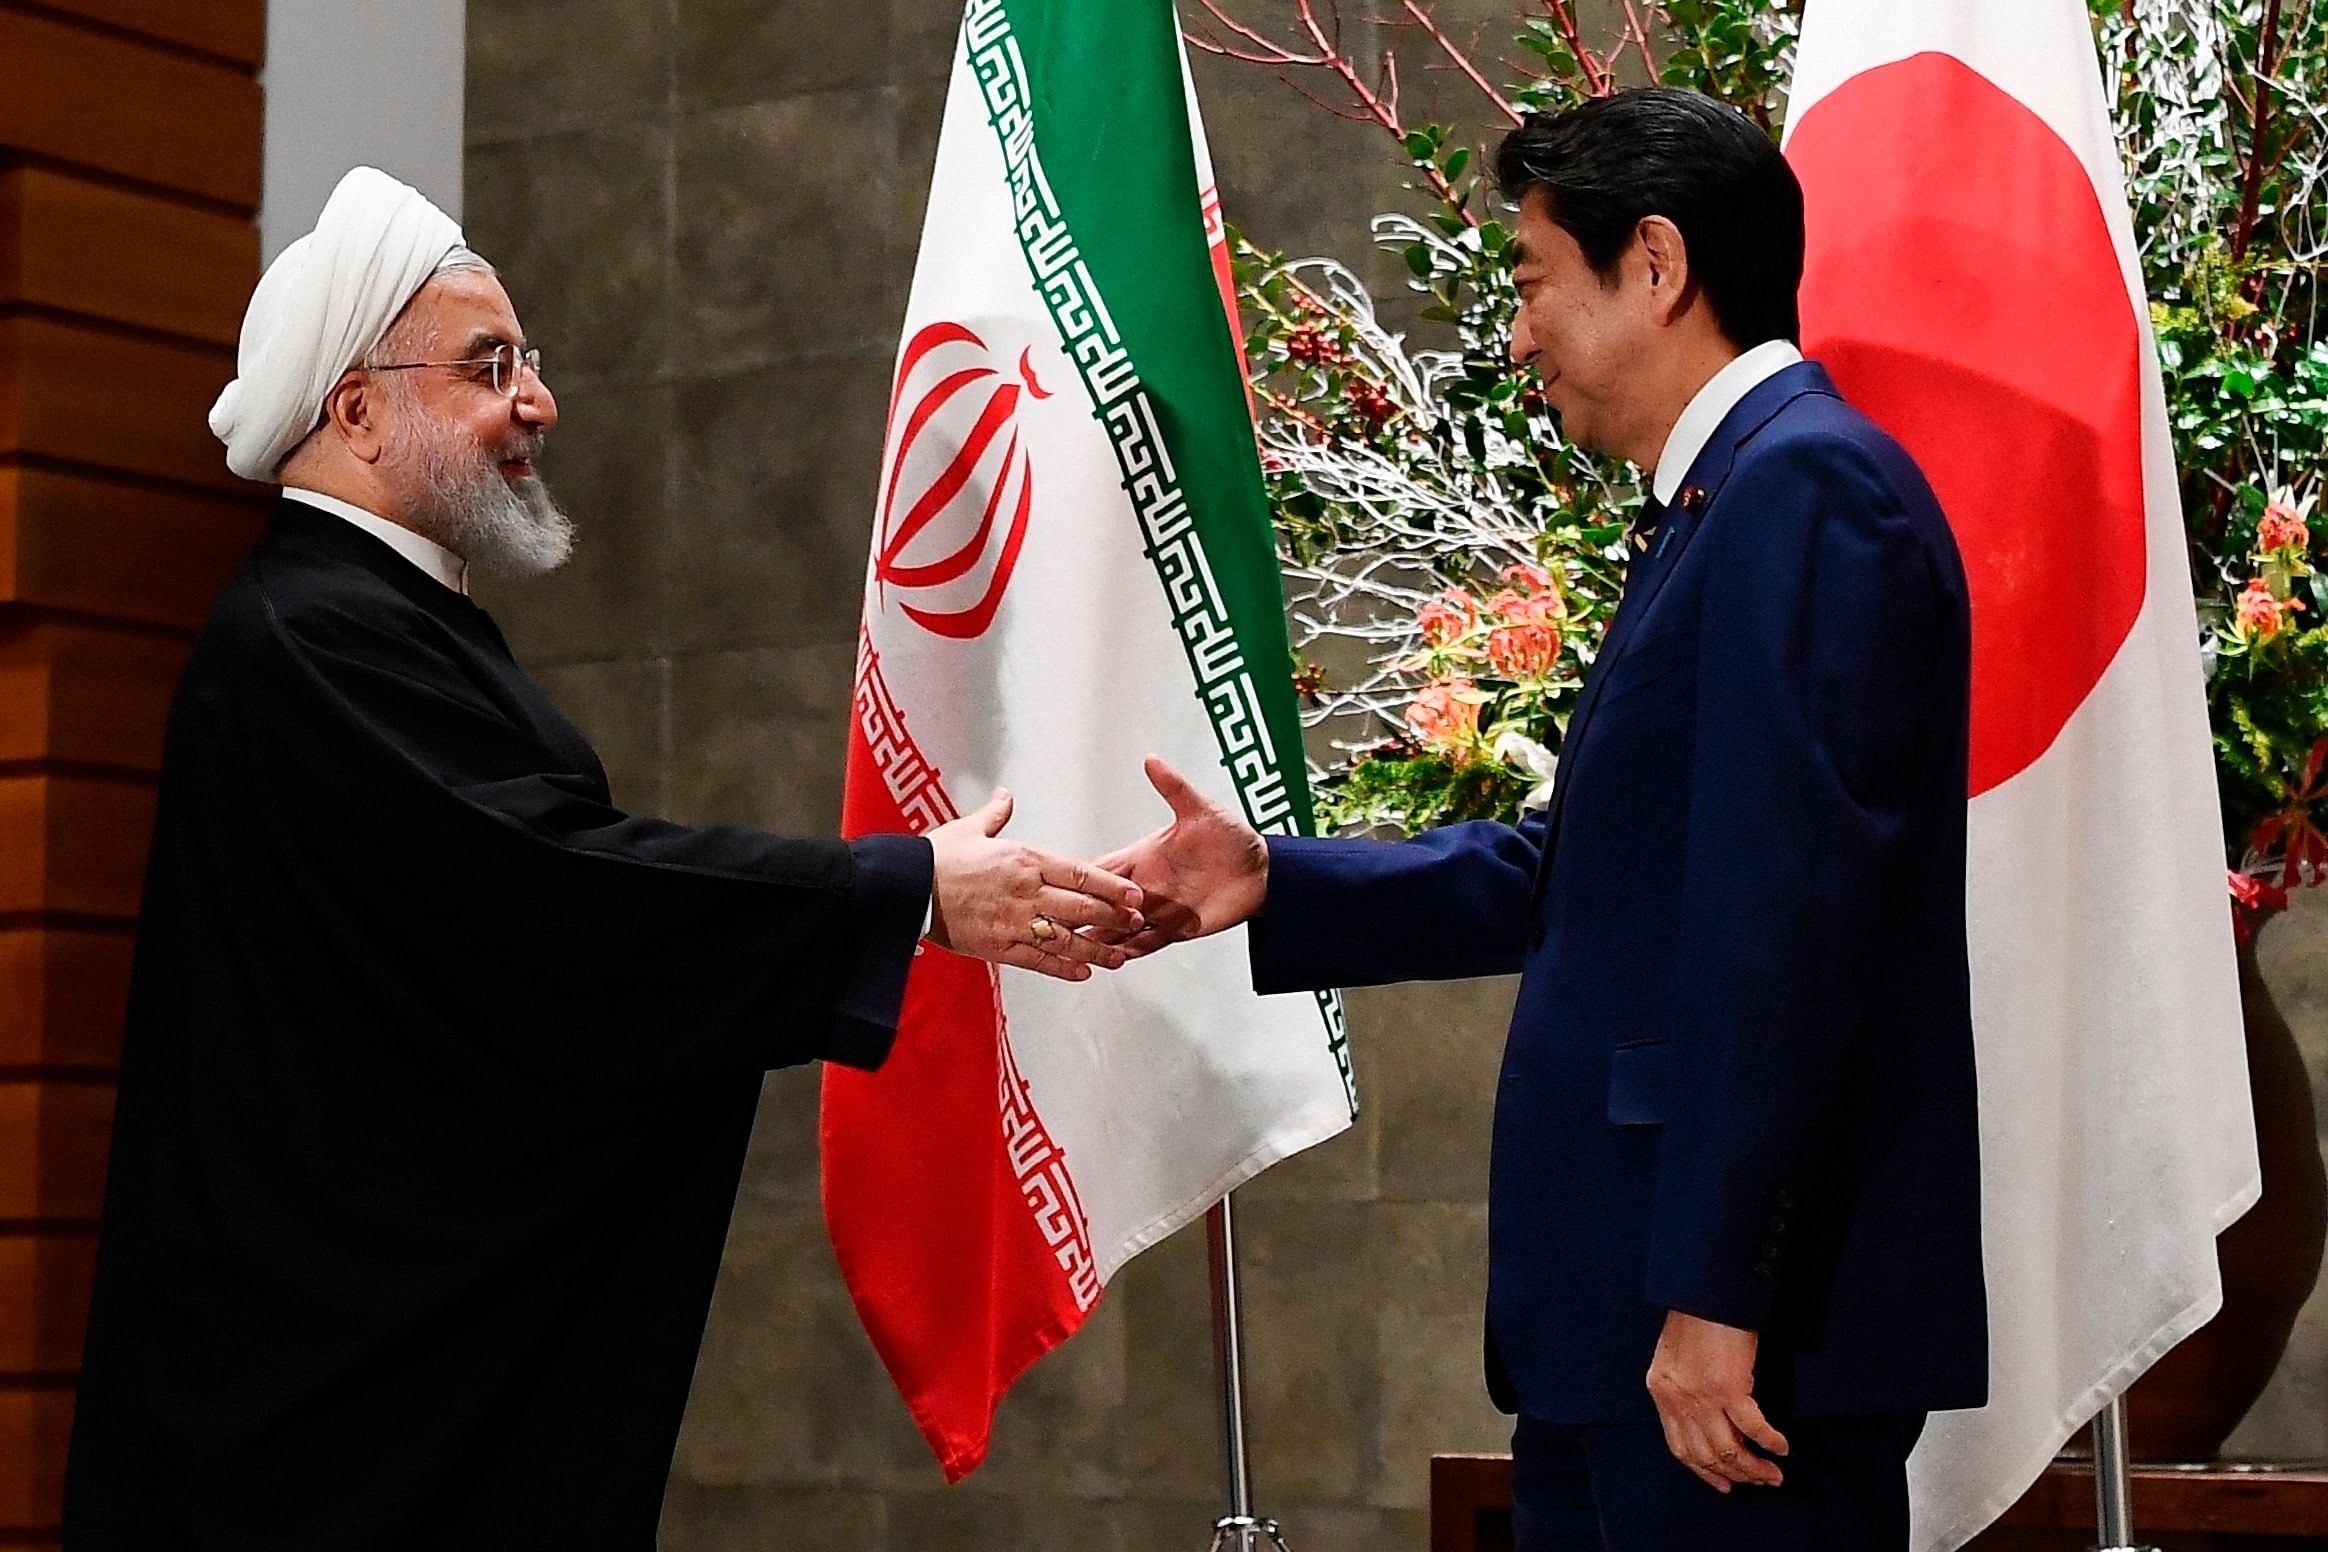 Iranian President Hassan Rouhani, left, and Japanese Prime Minister Shinzo Abe, right, shake hands before their meeting at the prime minister's office in Tokyo. (PTI Photo)